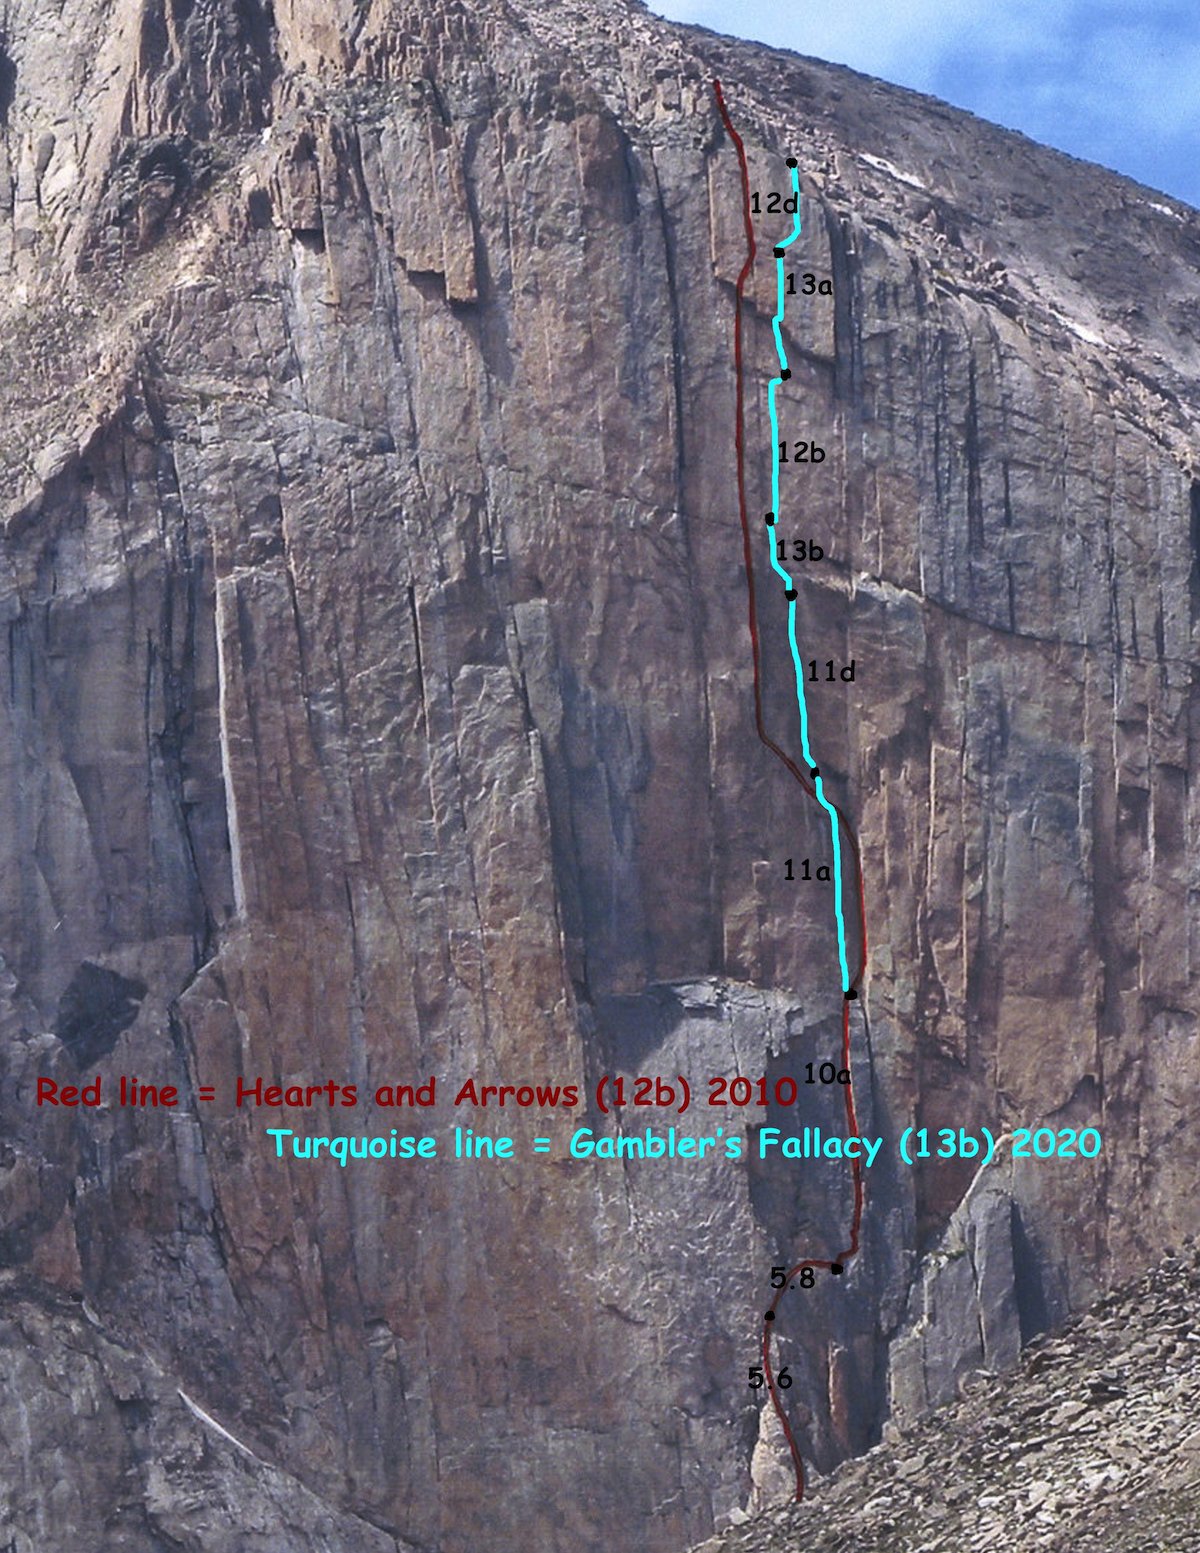 The blue line shows where Gambler's Fallacy deviates from Hearts and Arrows (5.12b), which is marked in red and takes a more circuitous route up the Diamond. [Image] Chris Weidner